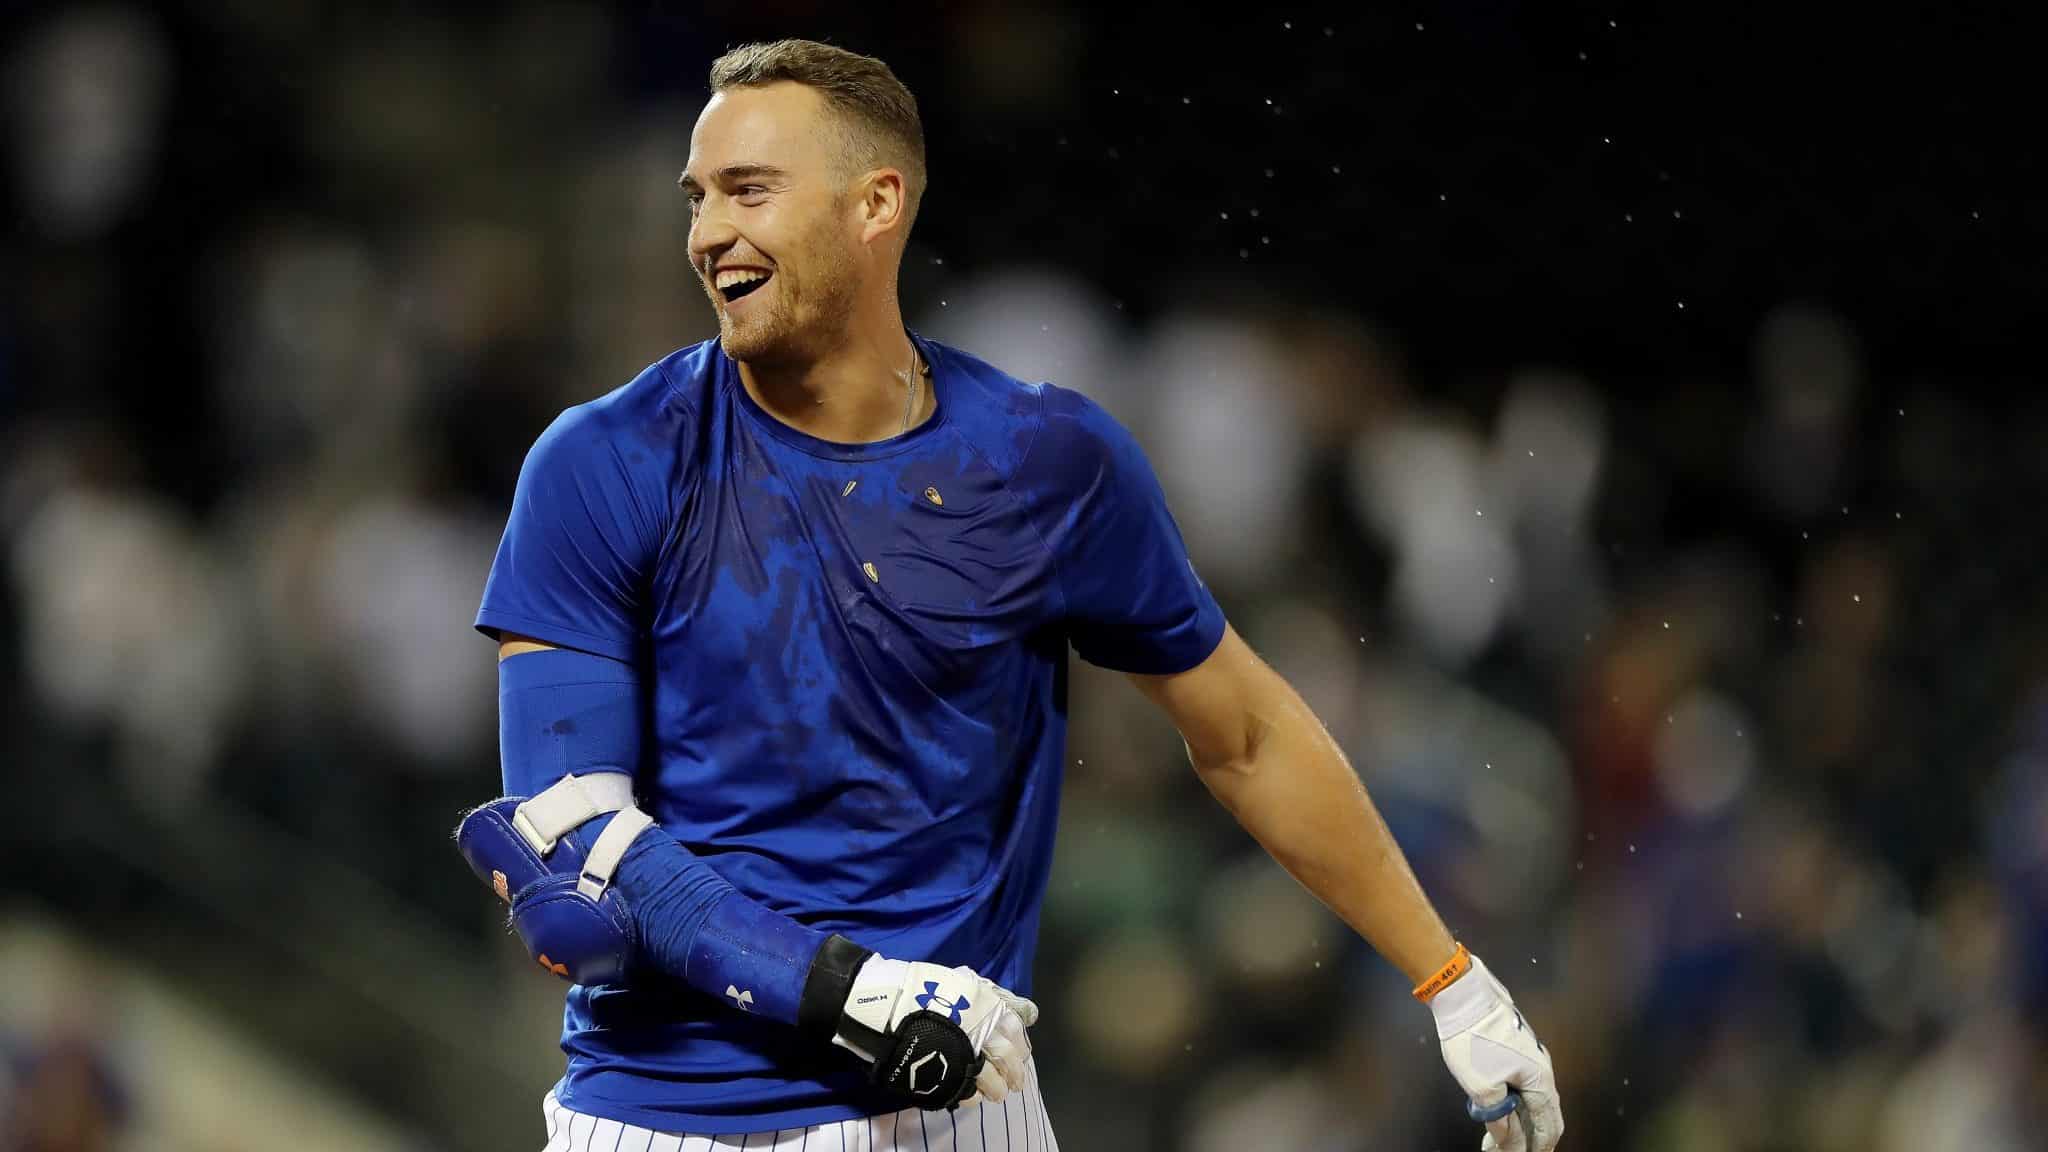 NEW YORK, NEW YORK - SEPTEMBER 24: Brandon Nimmo #9 of the New York Mets celebrates after he was walked with the bases loaded to score the game winning run in the 11th inning against the Miami Marlins at Citi Field on September 24, 2019 in the Flushing neighborhood of the Queens borough of New York City.The New York Mets defeated the Miami Marlins 5-4 in 11 innings.